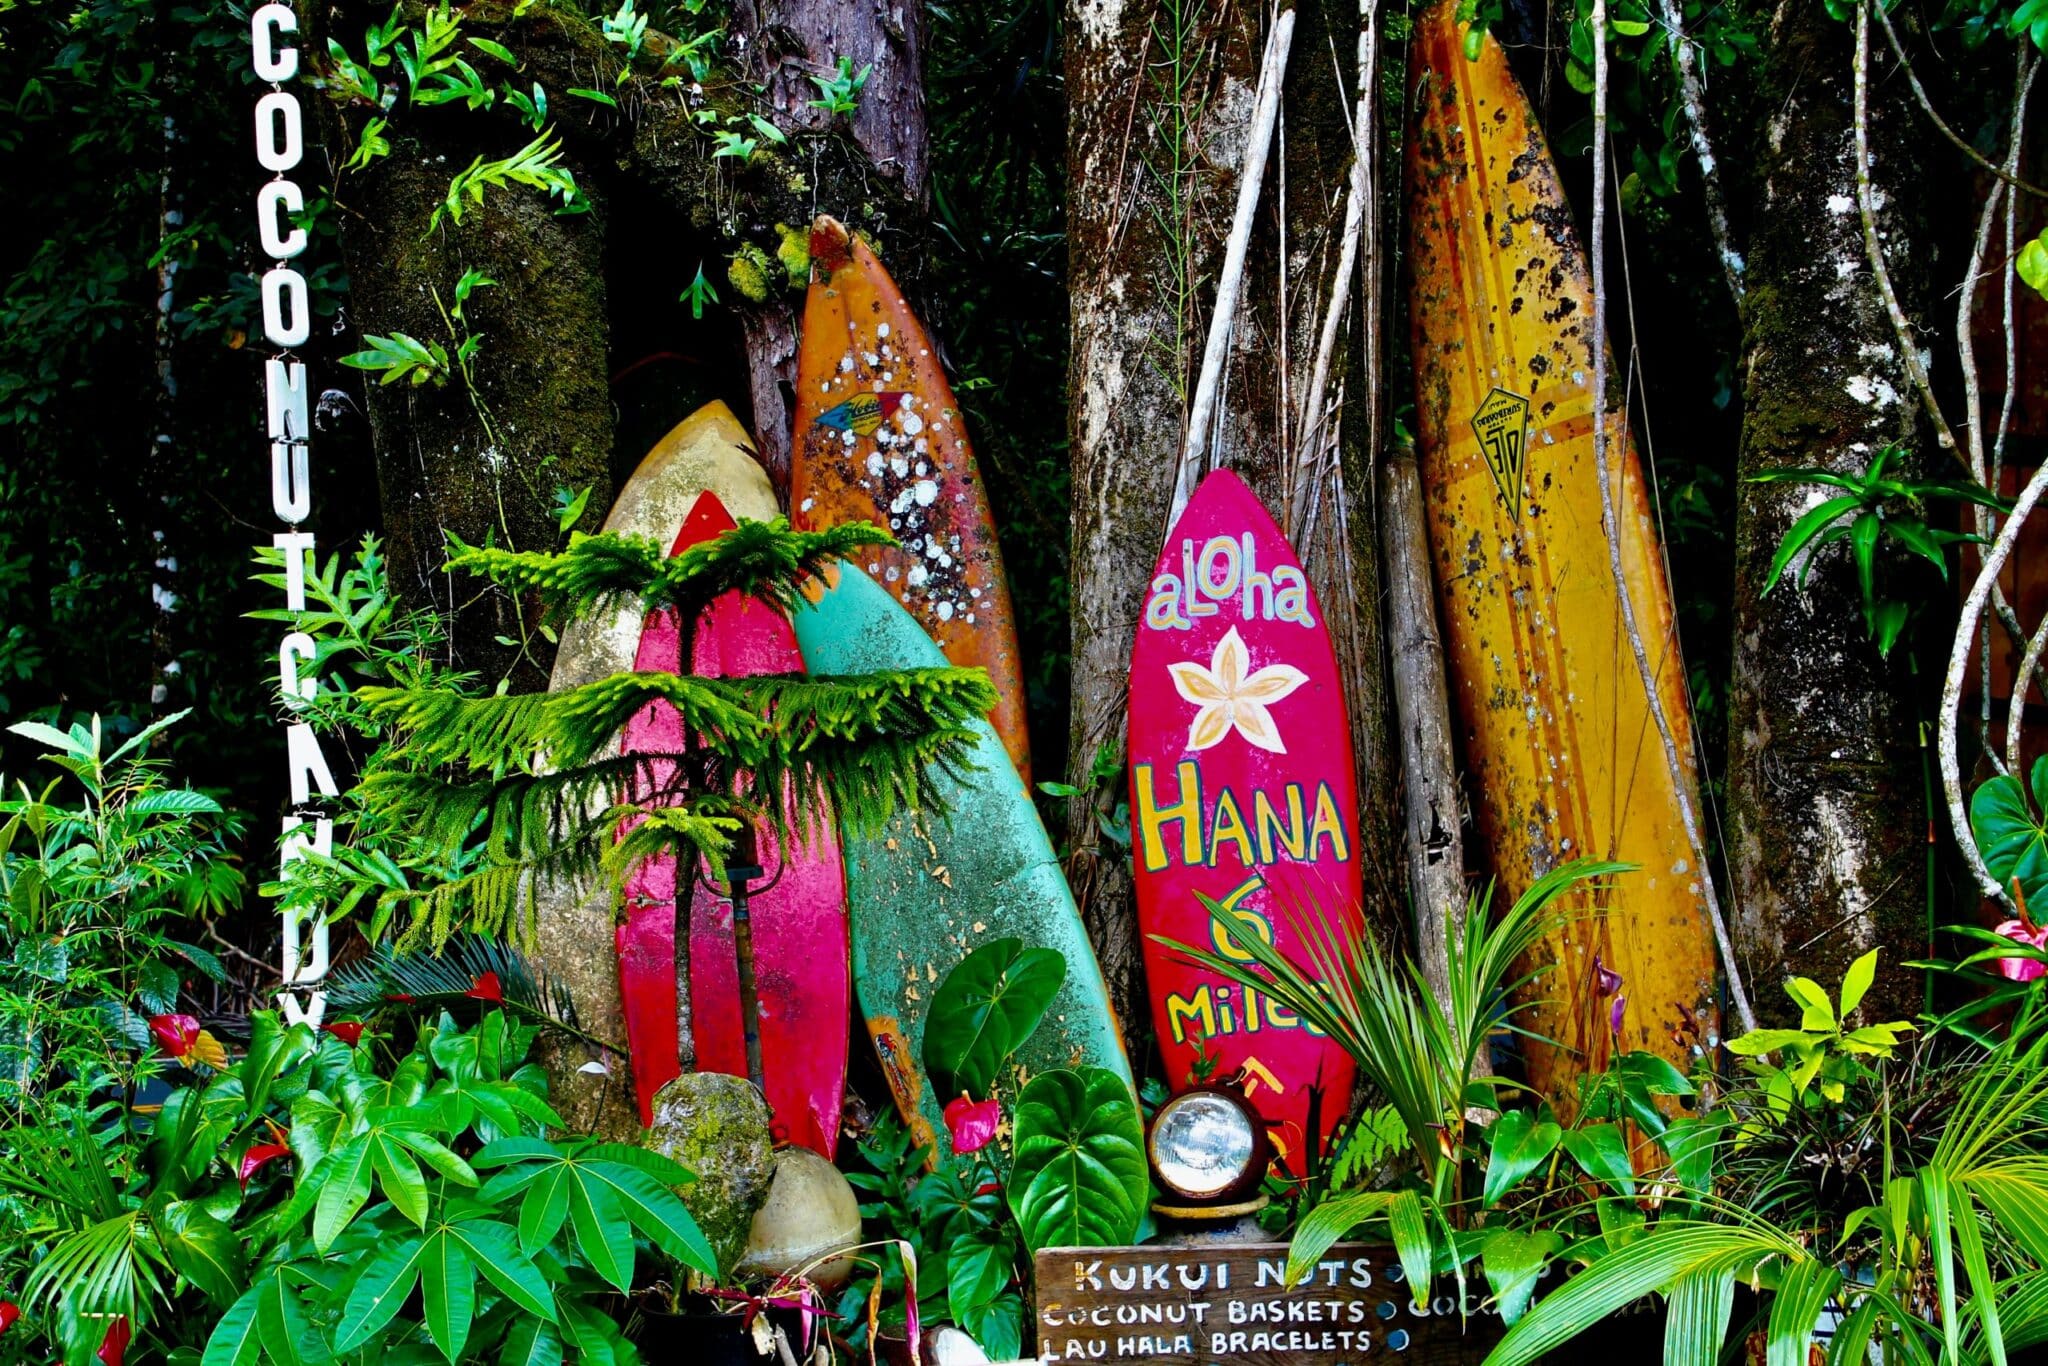 <p>The Road to Hana day trip is one of the most popular activities on Maui for a reason. This 52-mile journey allows you to explore an undeveloped portion of east Maui that feels like the Hawaii of yesteryear. From a “Half Hana” to a full 12-hour day, <a href="https://planneratheart.com/the-road-to-hana-stops/" rel="noopener">plan your Road to Hana stops </a>at famous sites like Keanae Peninsula, Wai'anapanapa State Park, and the world-famous Hamoa Beach Pipiwai Trail in Haleakala National Park. The Road to Hana is about enjoying the journey, not reaching the final destination, so don't forget to stop at infamous food stalls like Aunt Sandy's Banana Bread and Coconut Glen's.</p>